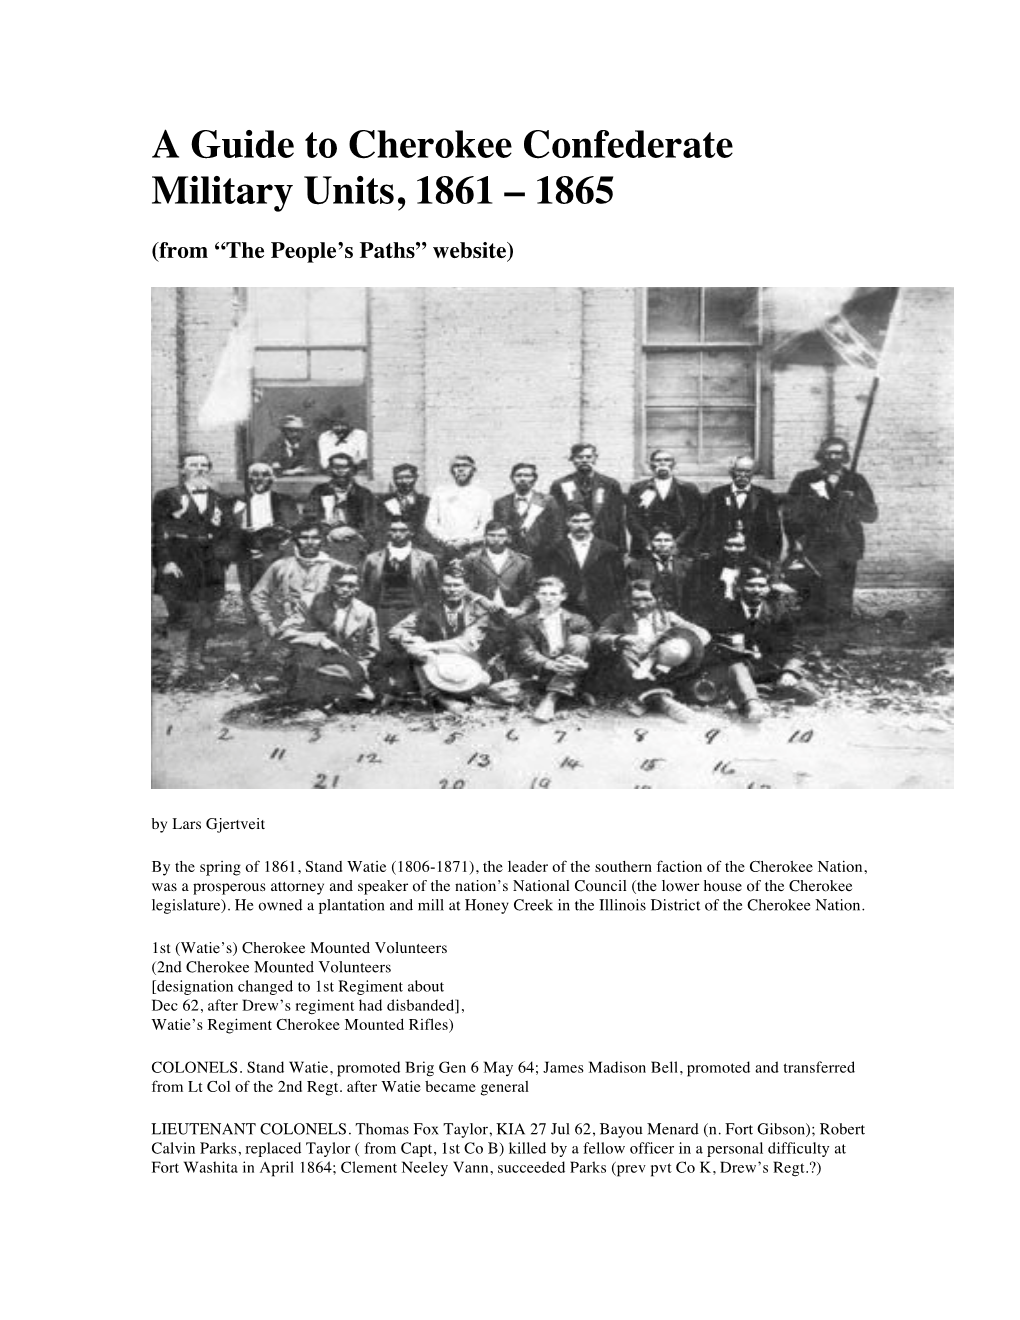 A Guide to Cherokee Confederate Military Units, 1861 – 1865